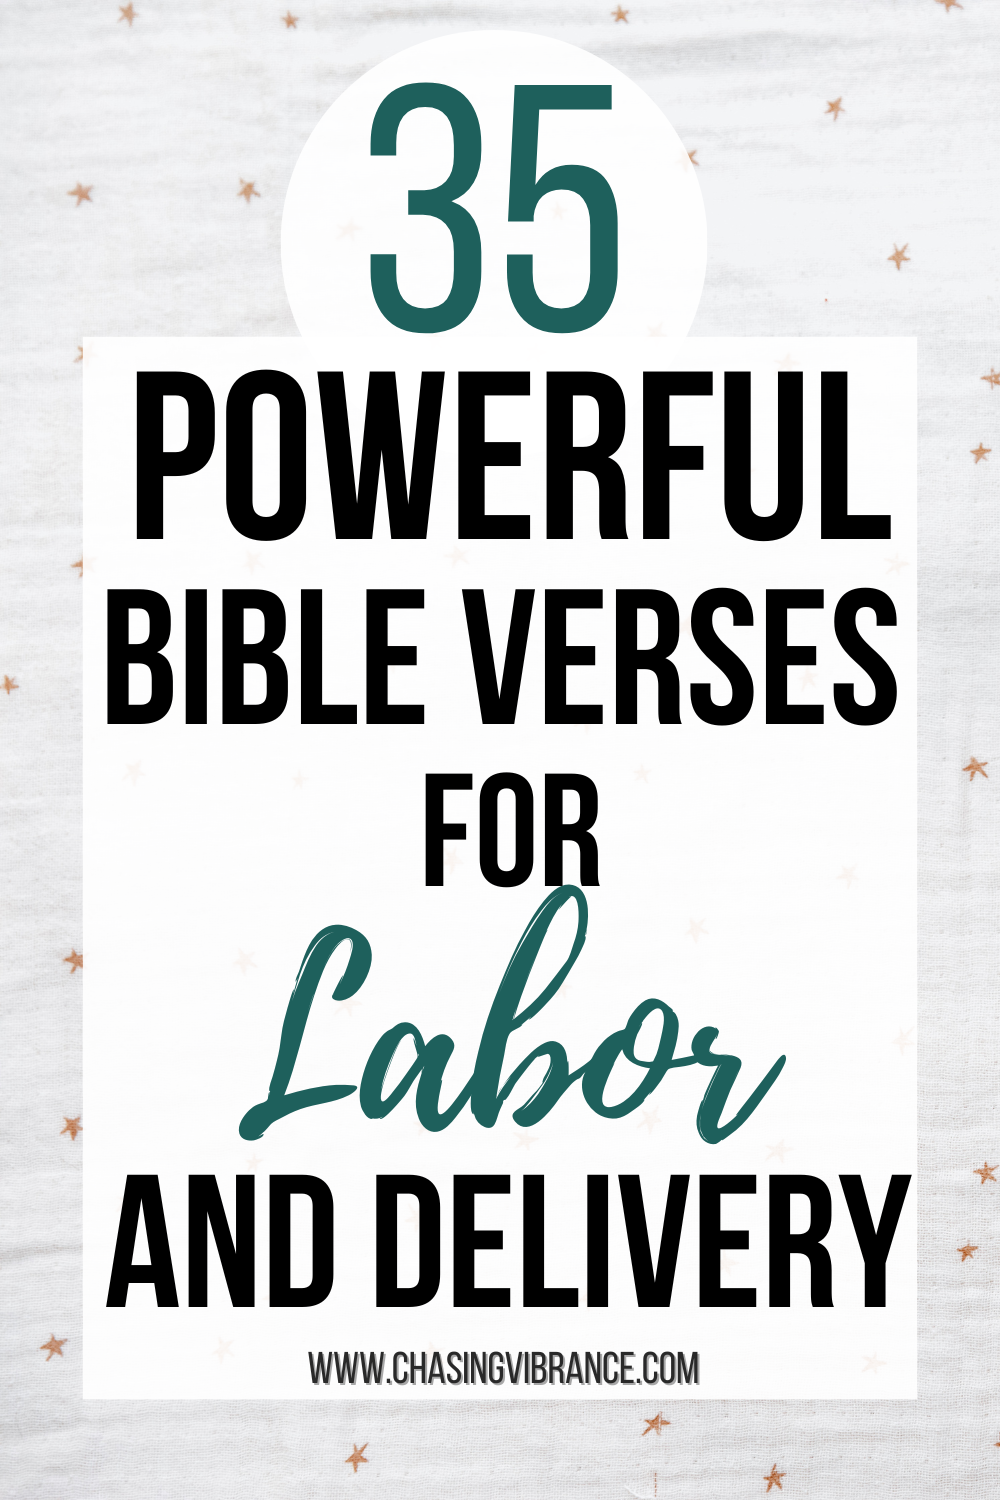 35 Powerful Bible Verses for Labor and Delivery